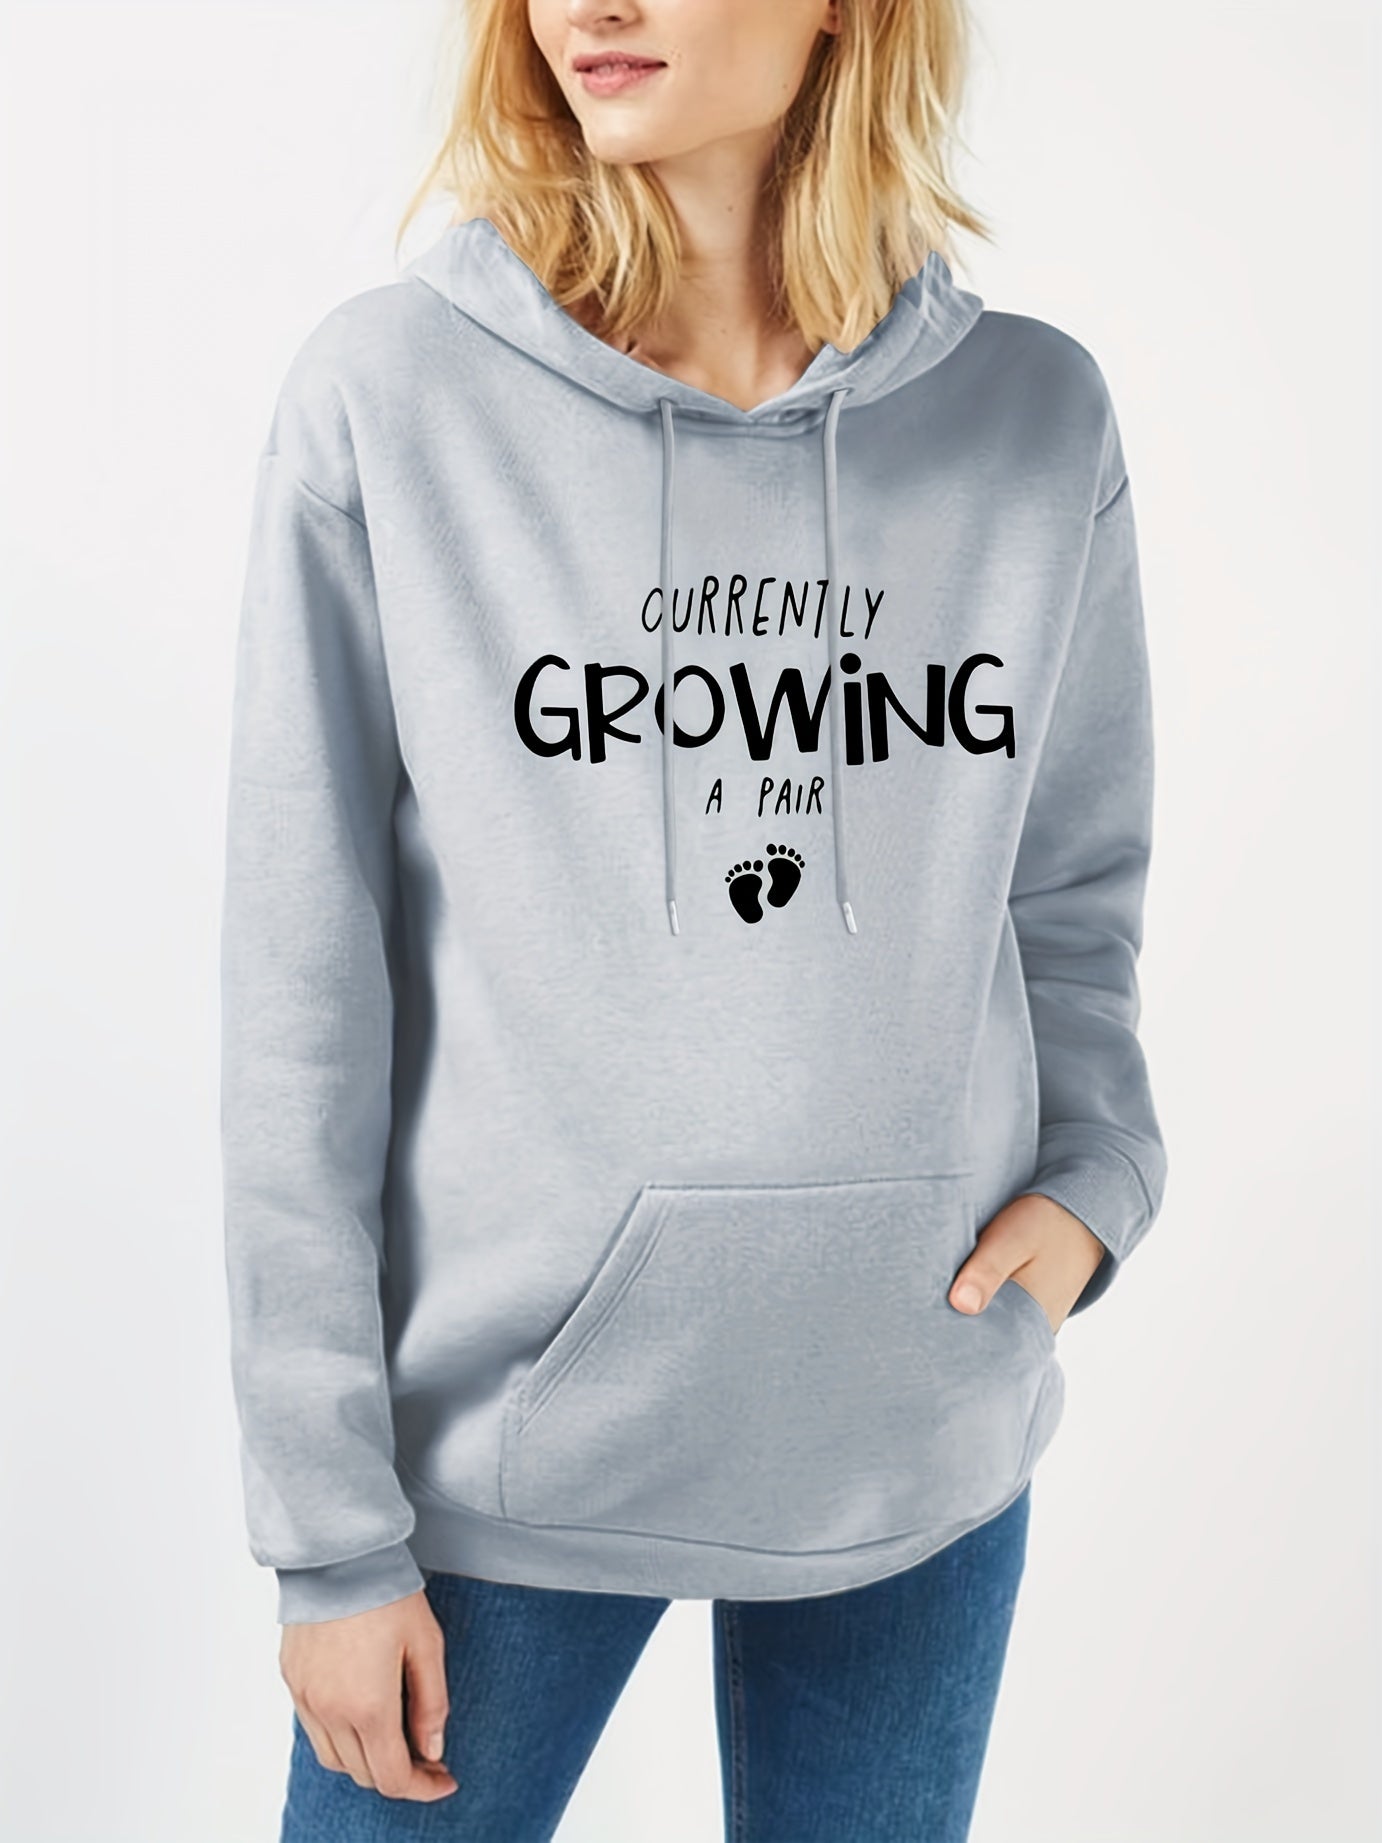 Currently Growing A Pair Women's Maternity Pullover Hooded Sweatshirt claimedbygoddesigns